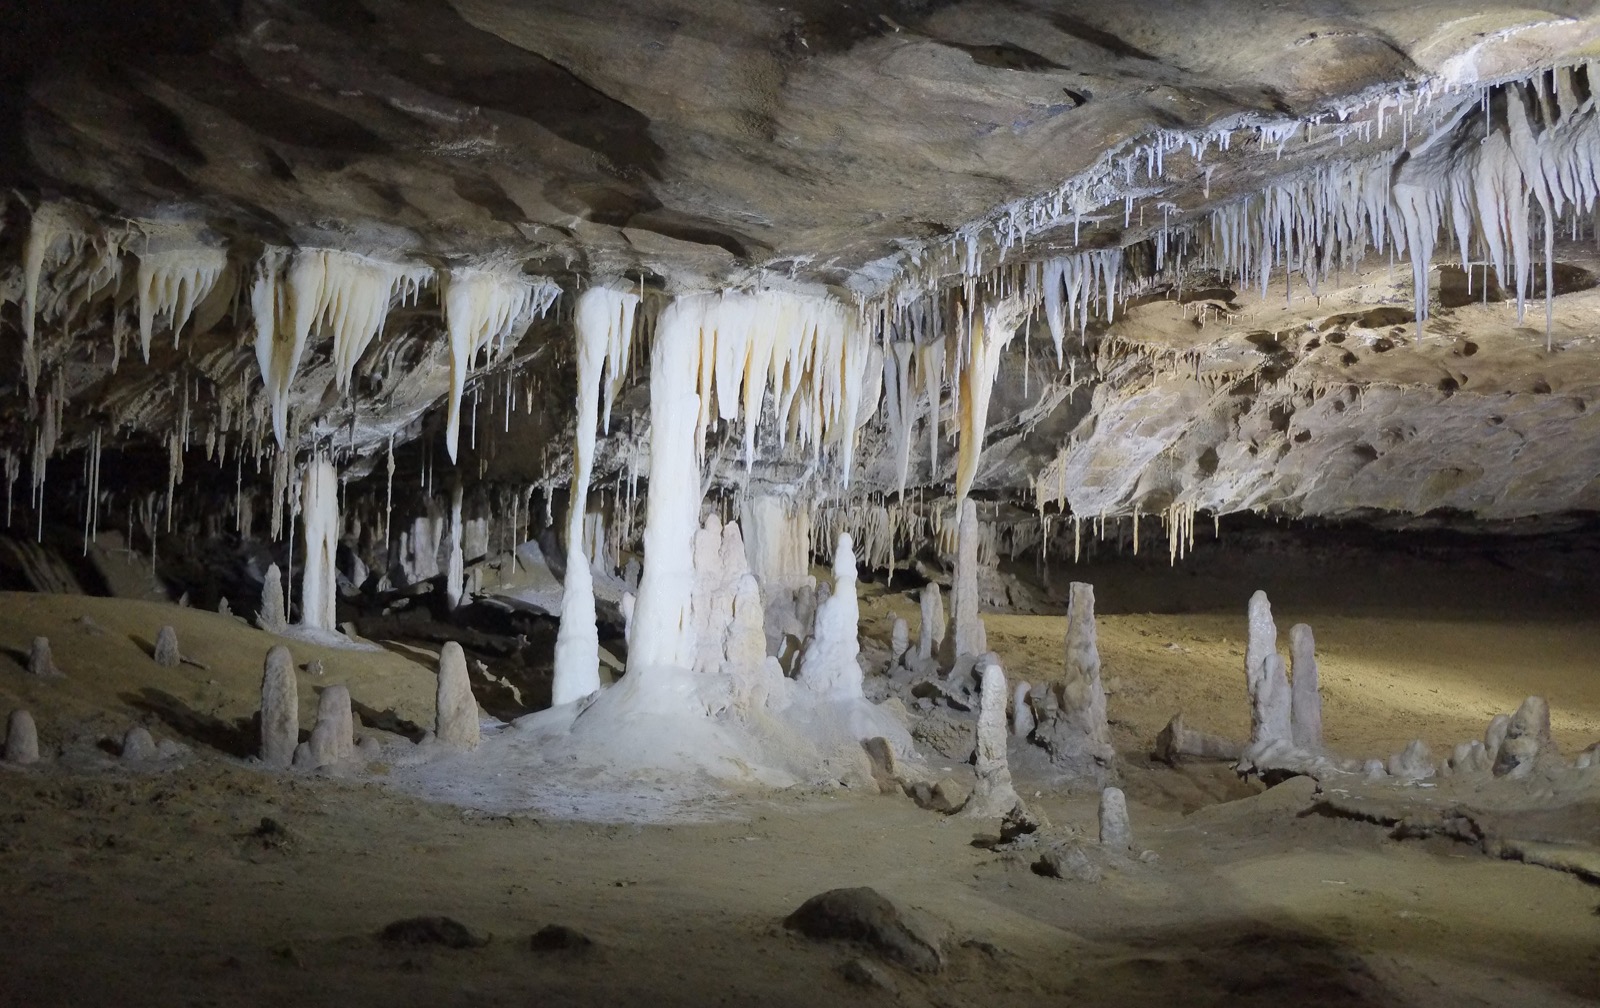 If You Can Get 18/24 on This Mixed Knowledge Quiz, You Probably Are the Smartest Friend Cavern Full Of Stalactites And Stalagmites In Metro Cave Te Ananui Cave